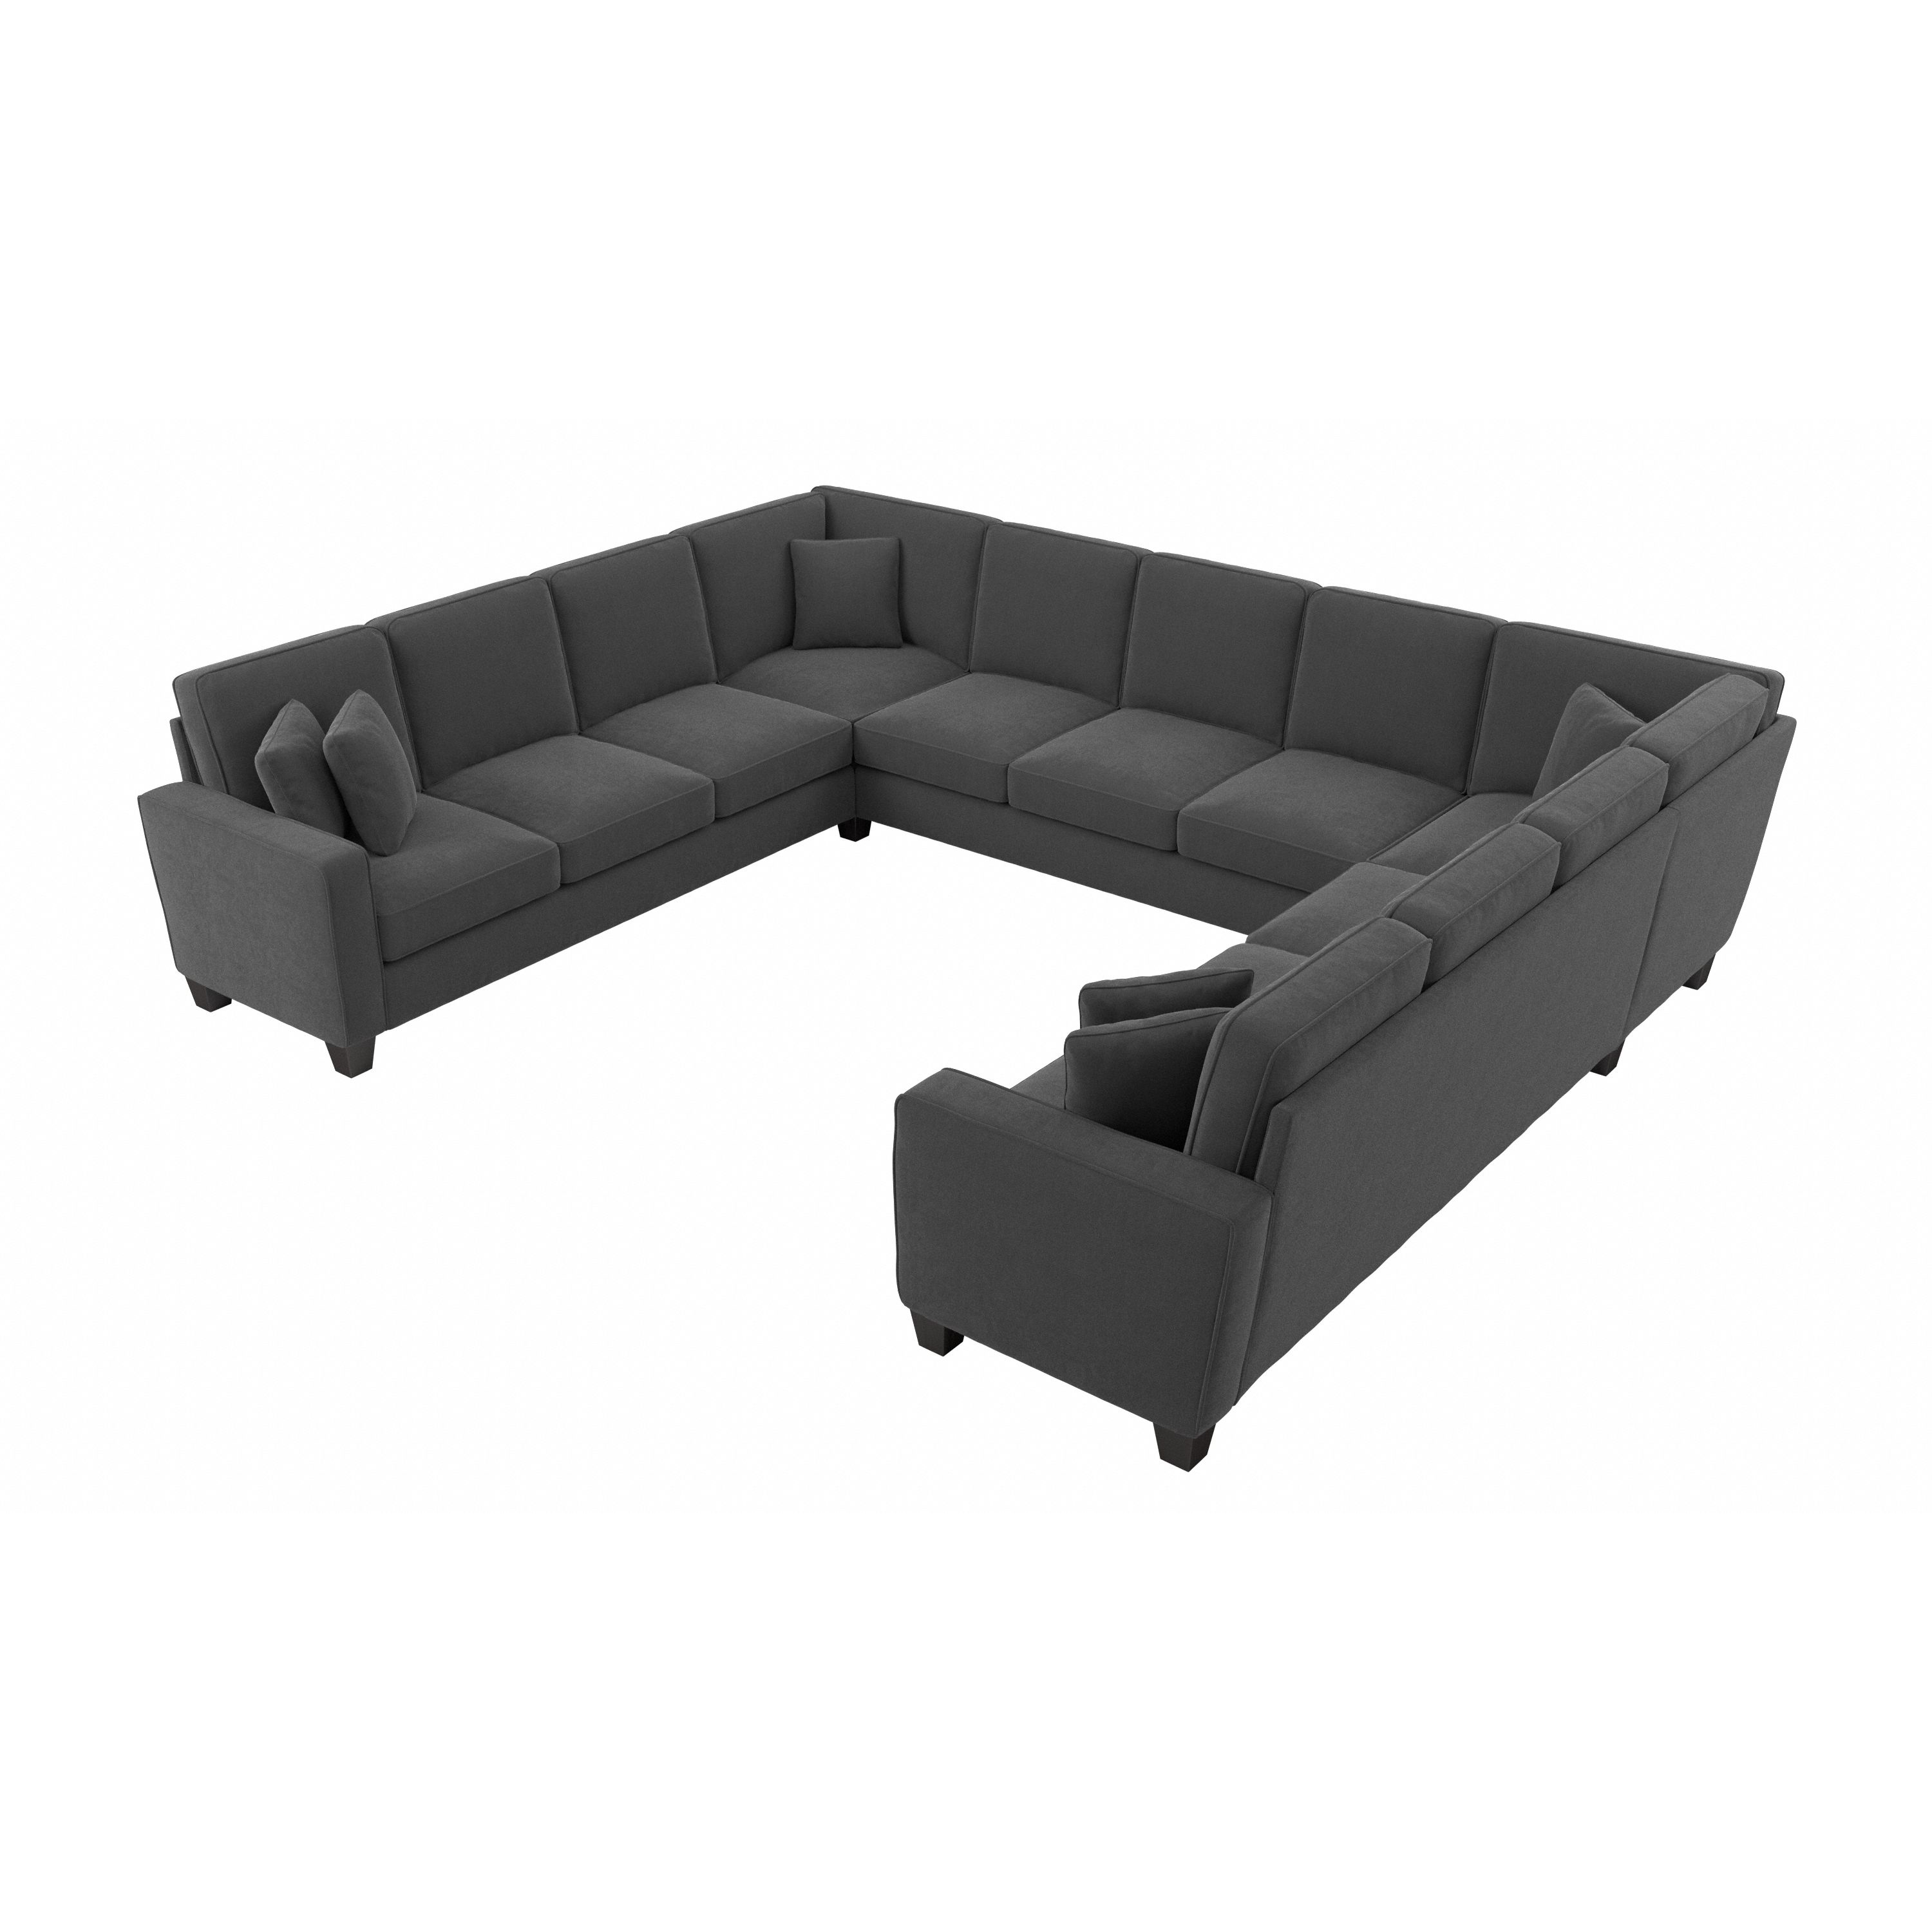 Shop Bush Furniture Stockton 137W U Shaped Sectional Couch 02 SNY135SCGH-03K #color_charcoal gray herringbone fabr